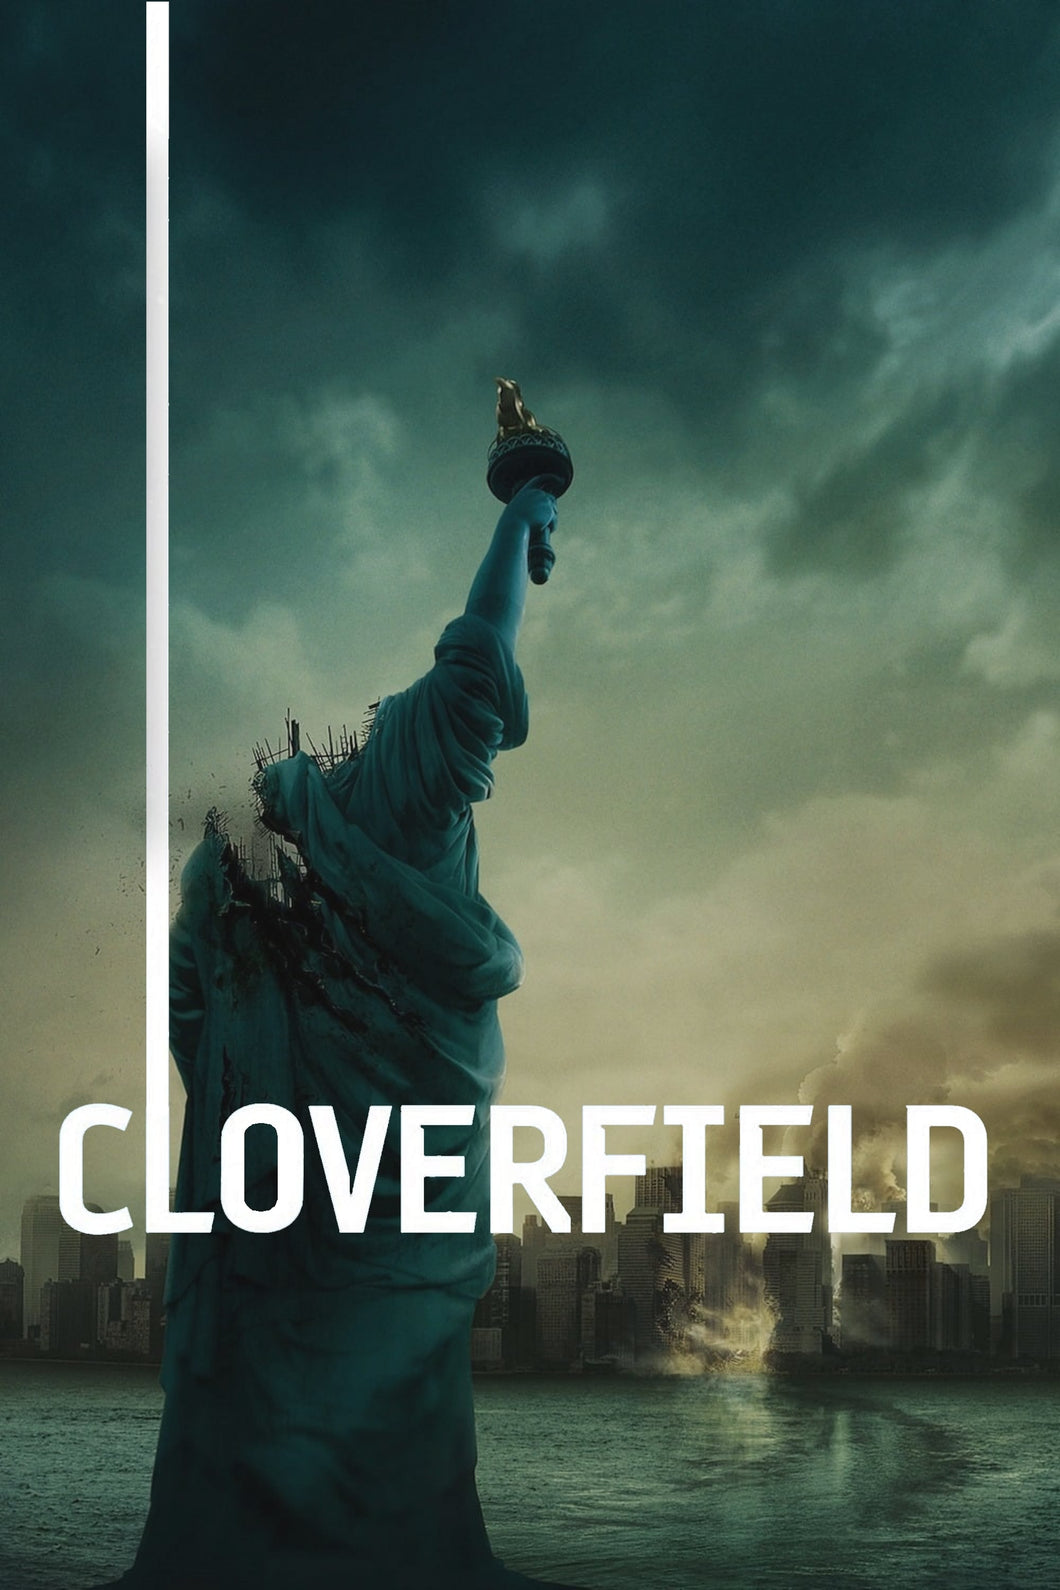 Cloverfield (2008) Movie Poster Framed or Unframed Glossy Poster Free UK Shipping!!!